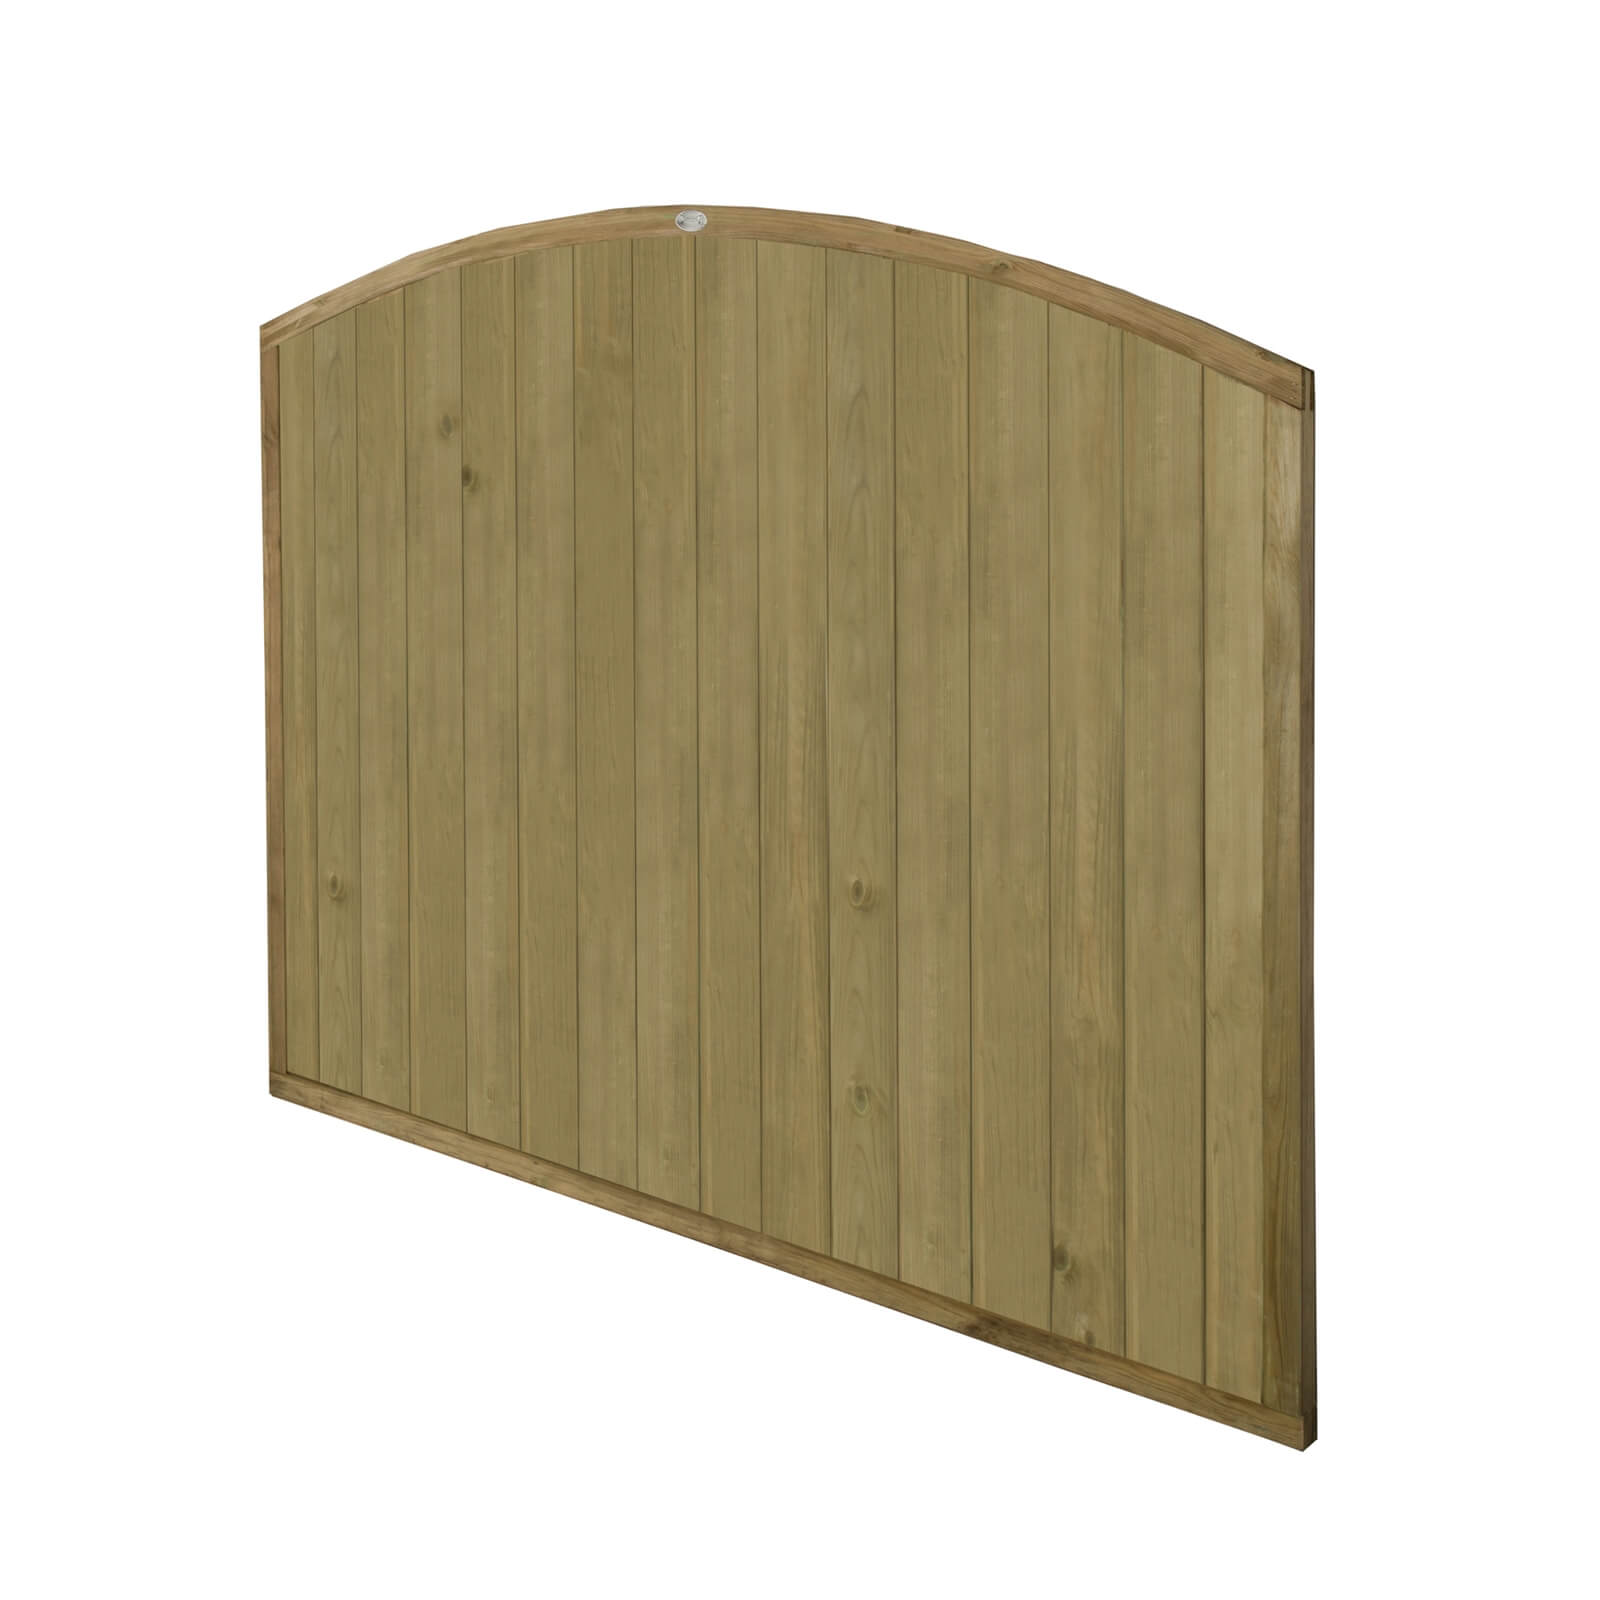 Forest Dome Tongue and Groove Panel - 5ft - Pack of 3